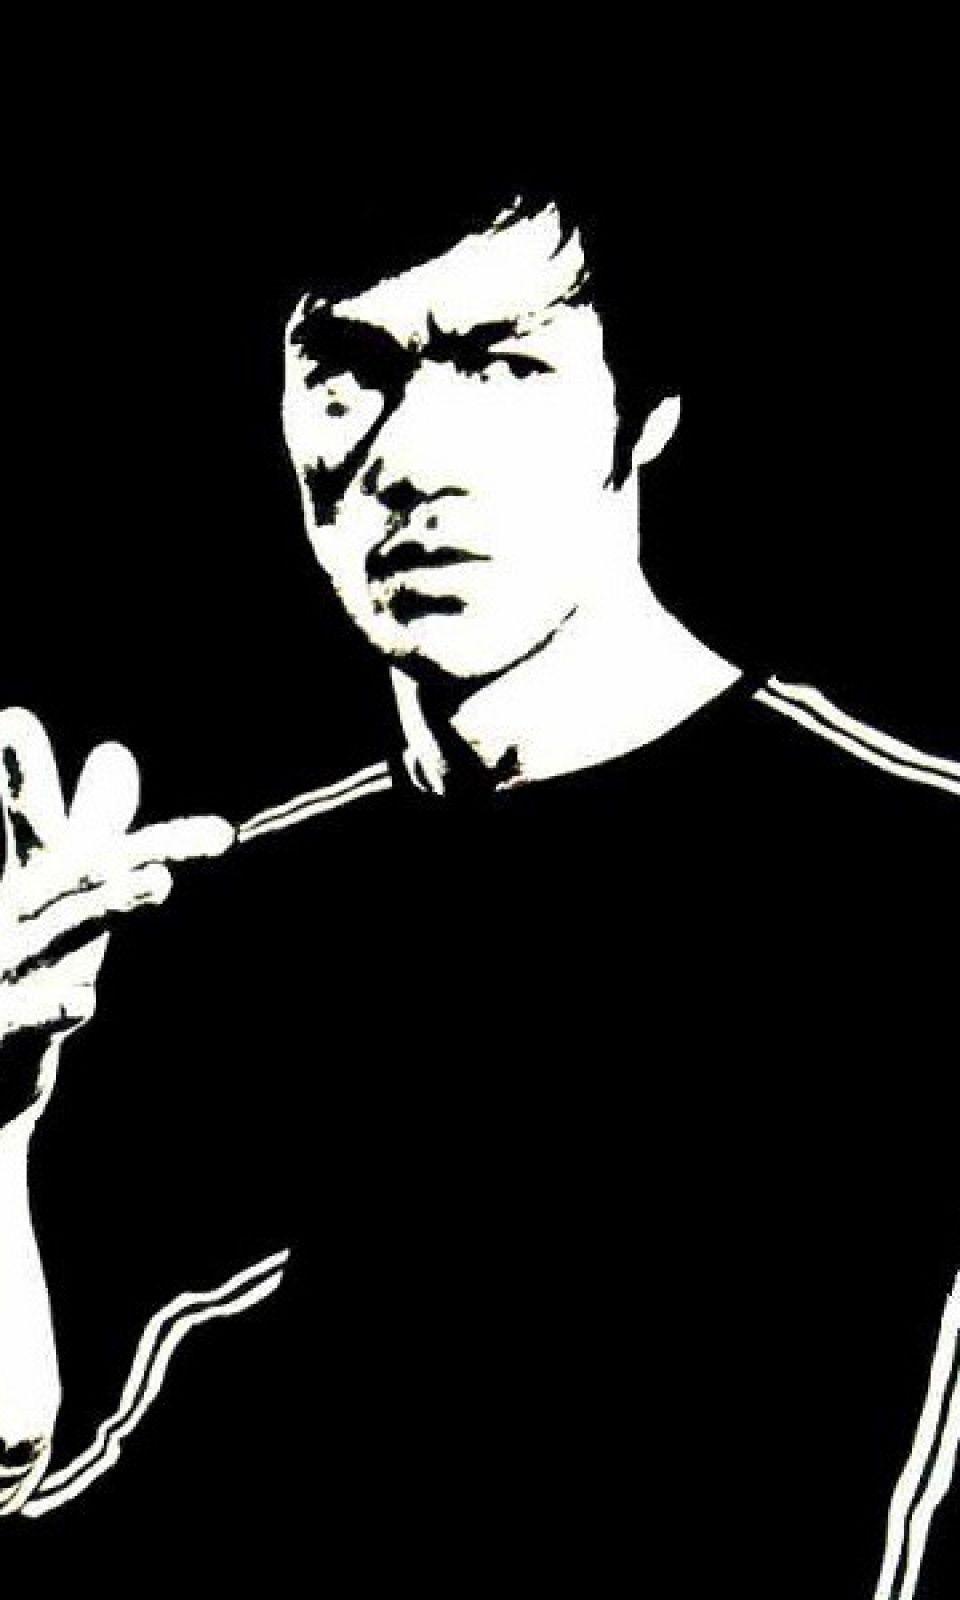 Download Bruce Lee wallpapers for mobile phone free Bruce Lee HD  pictures